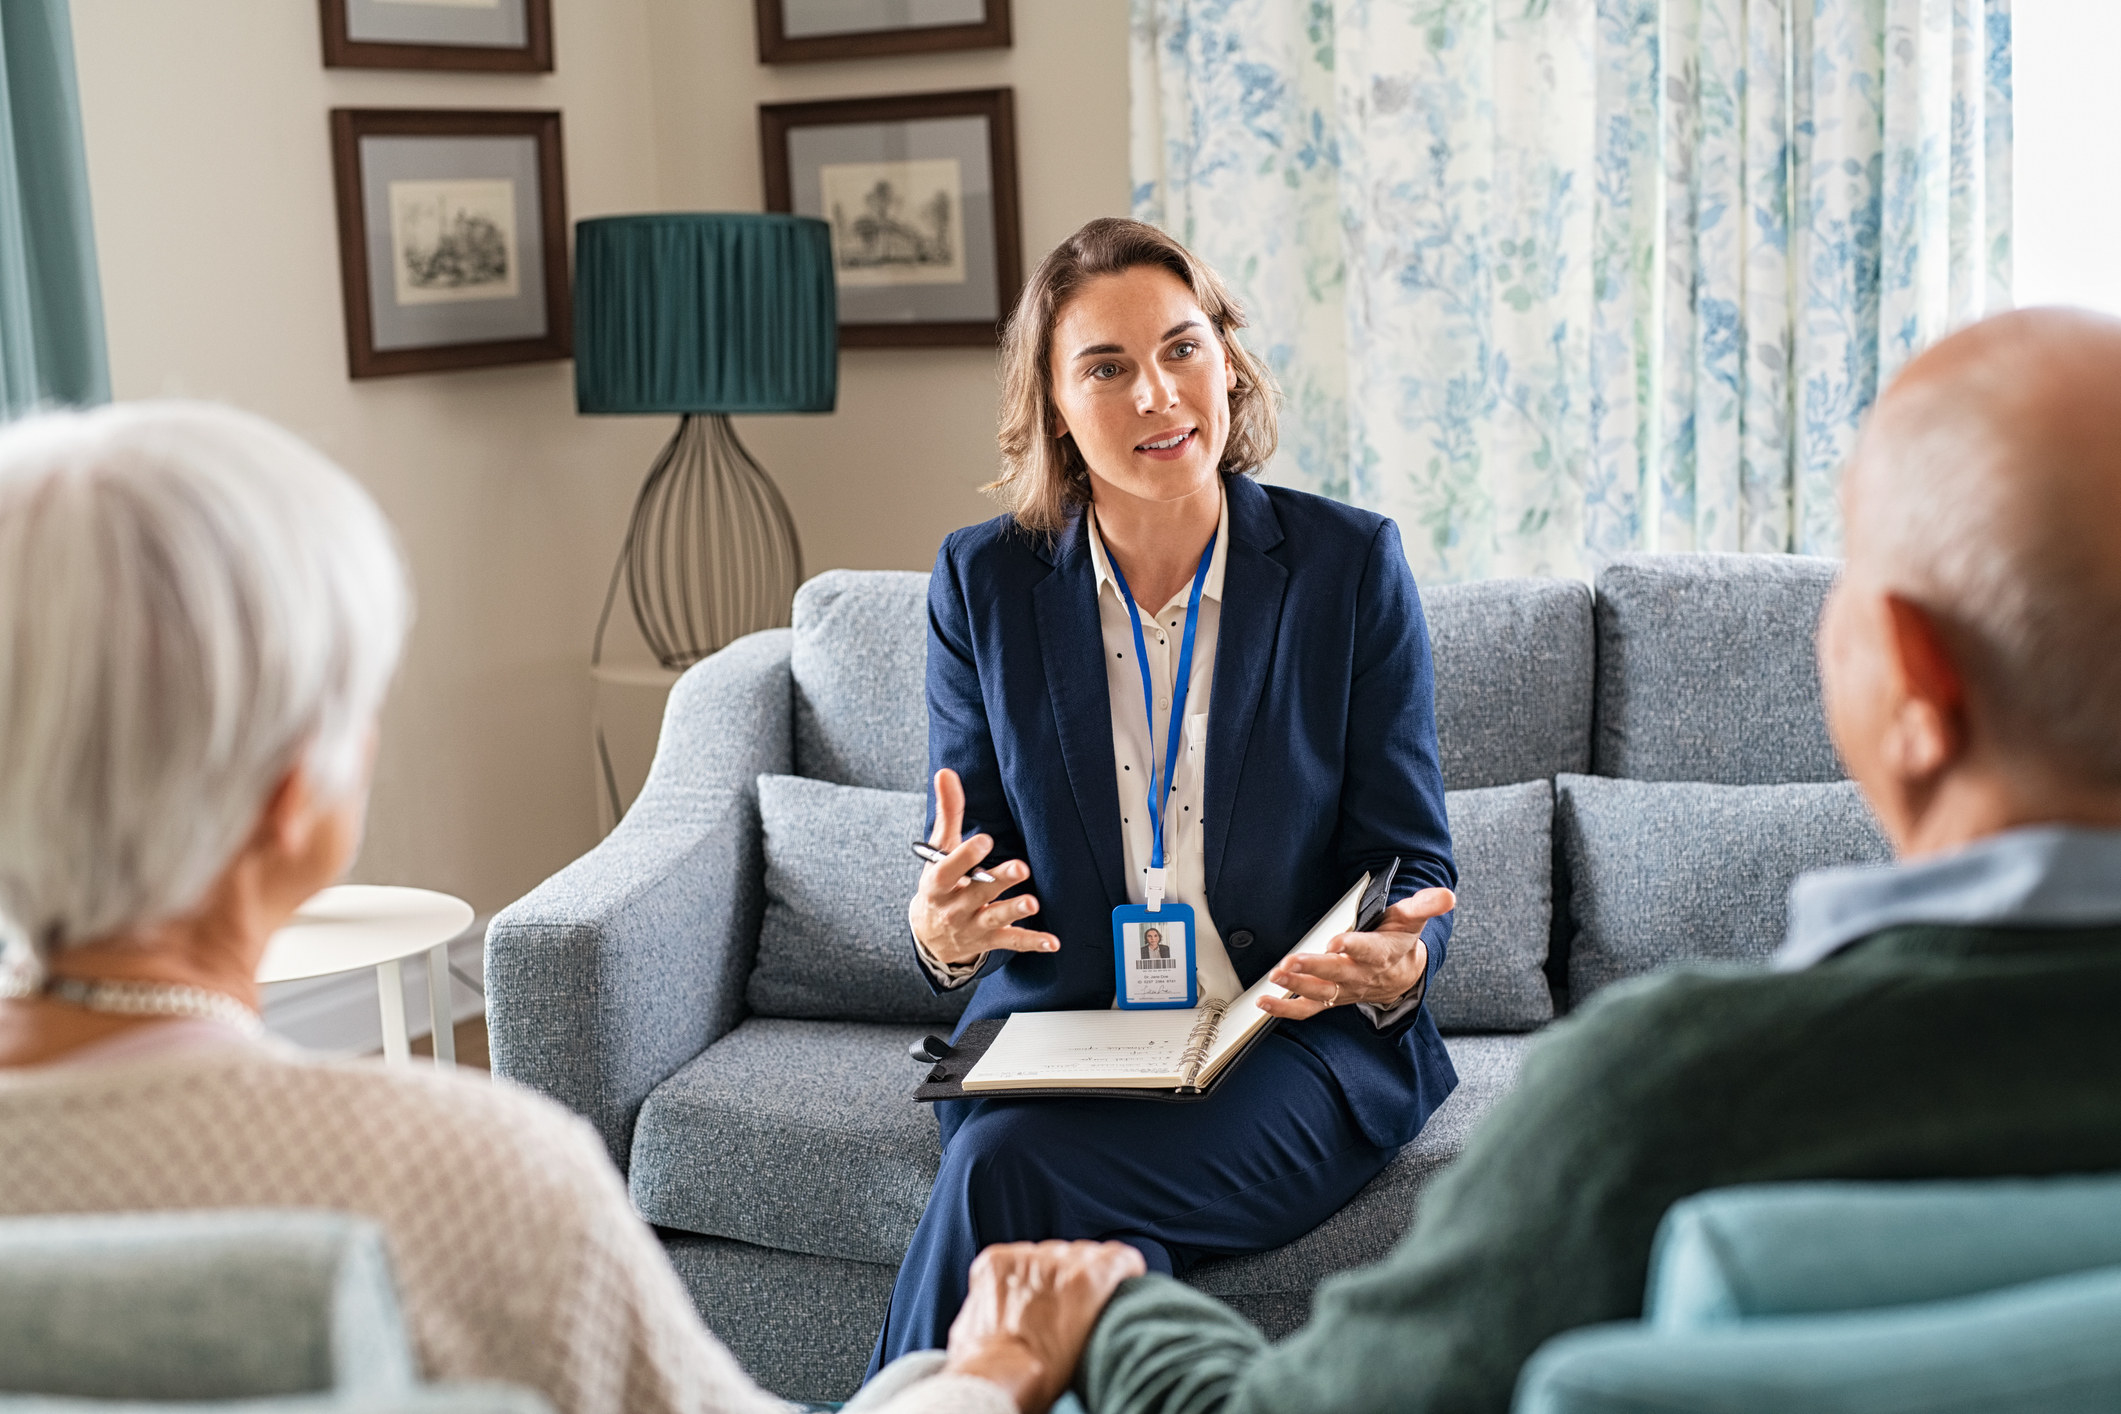 Woman sitting on a couch and speaking to two older people